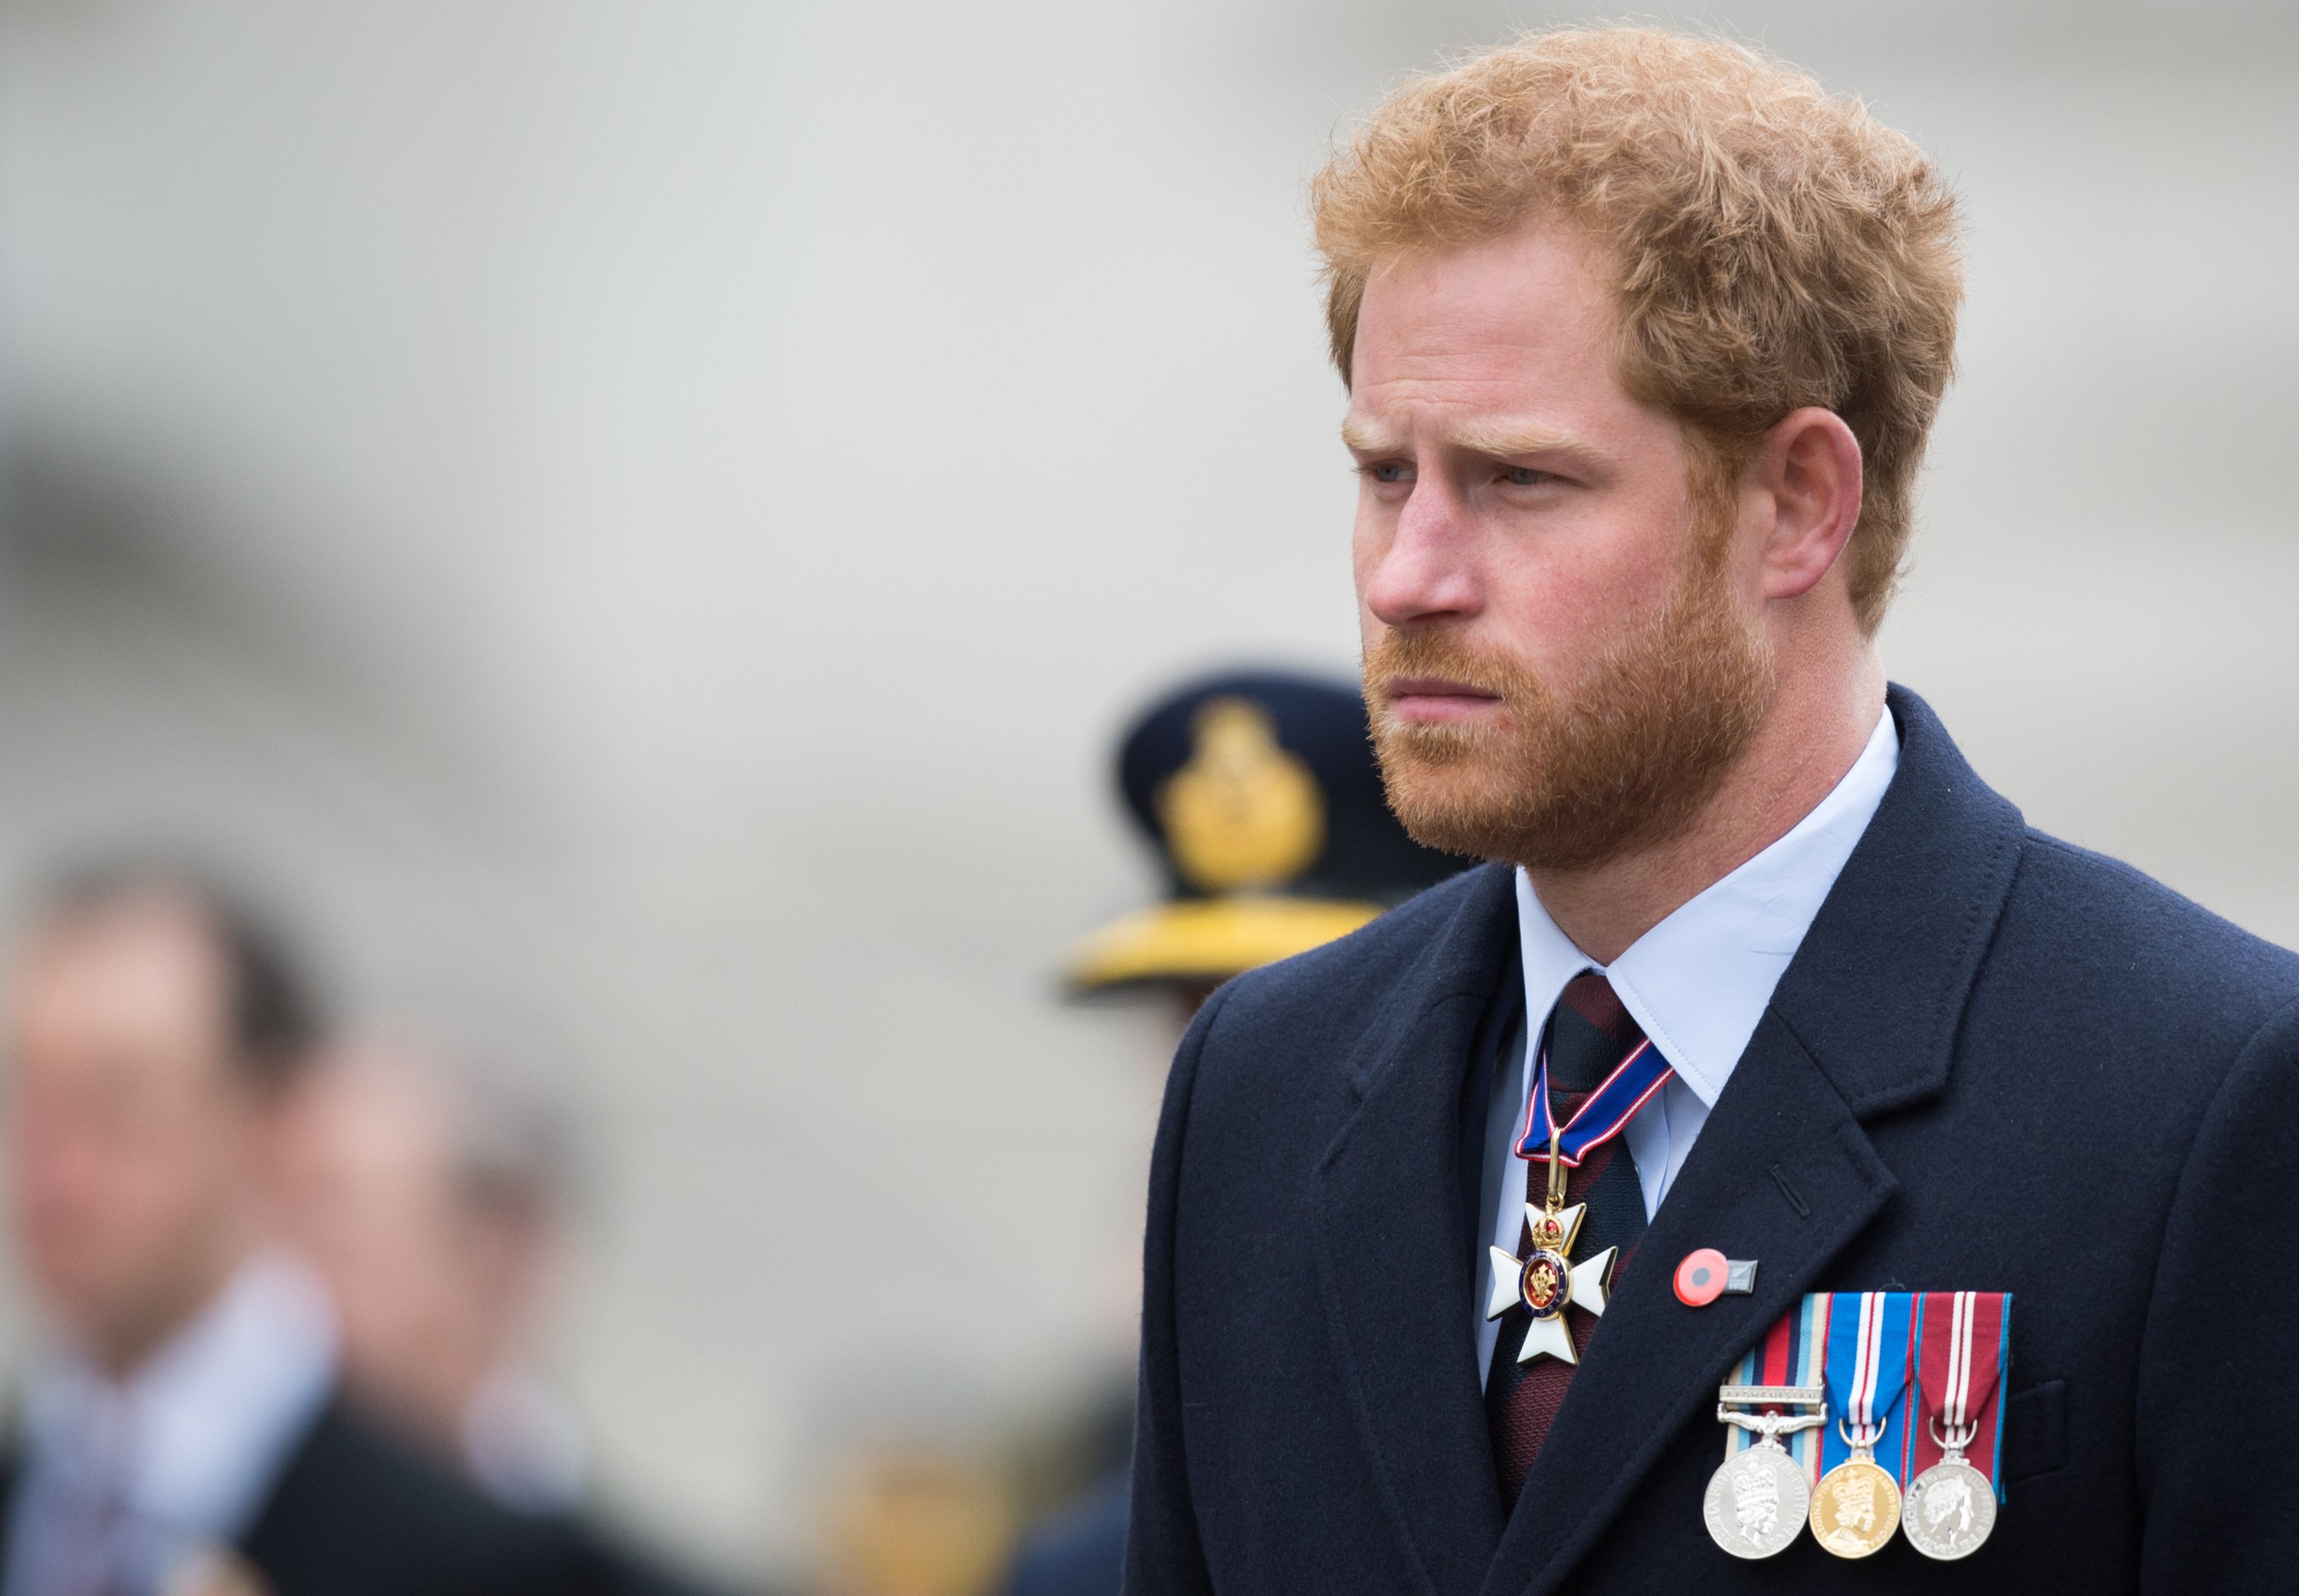 Prince Harry at a dawn service at Wellington Arch for Anzac Day commemorations, England, 2016. | Photo: Getty Images